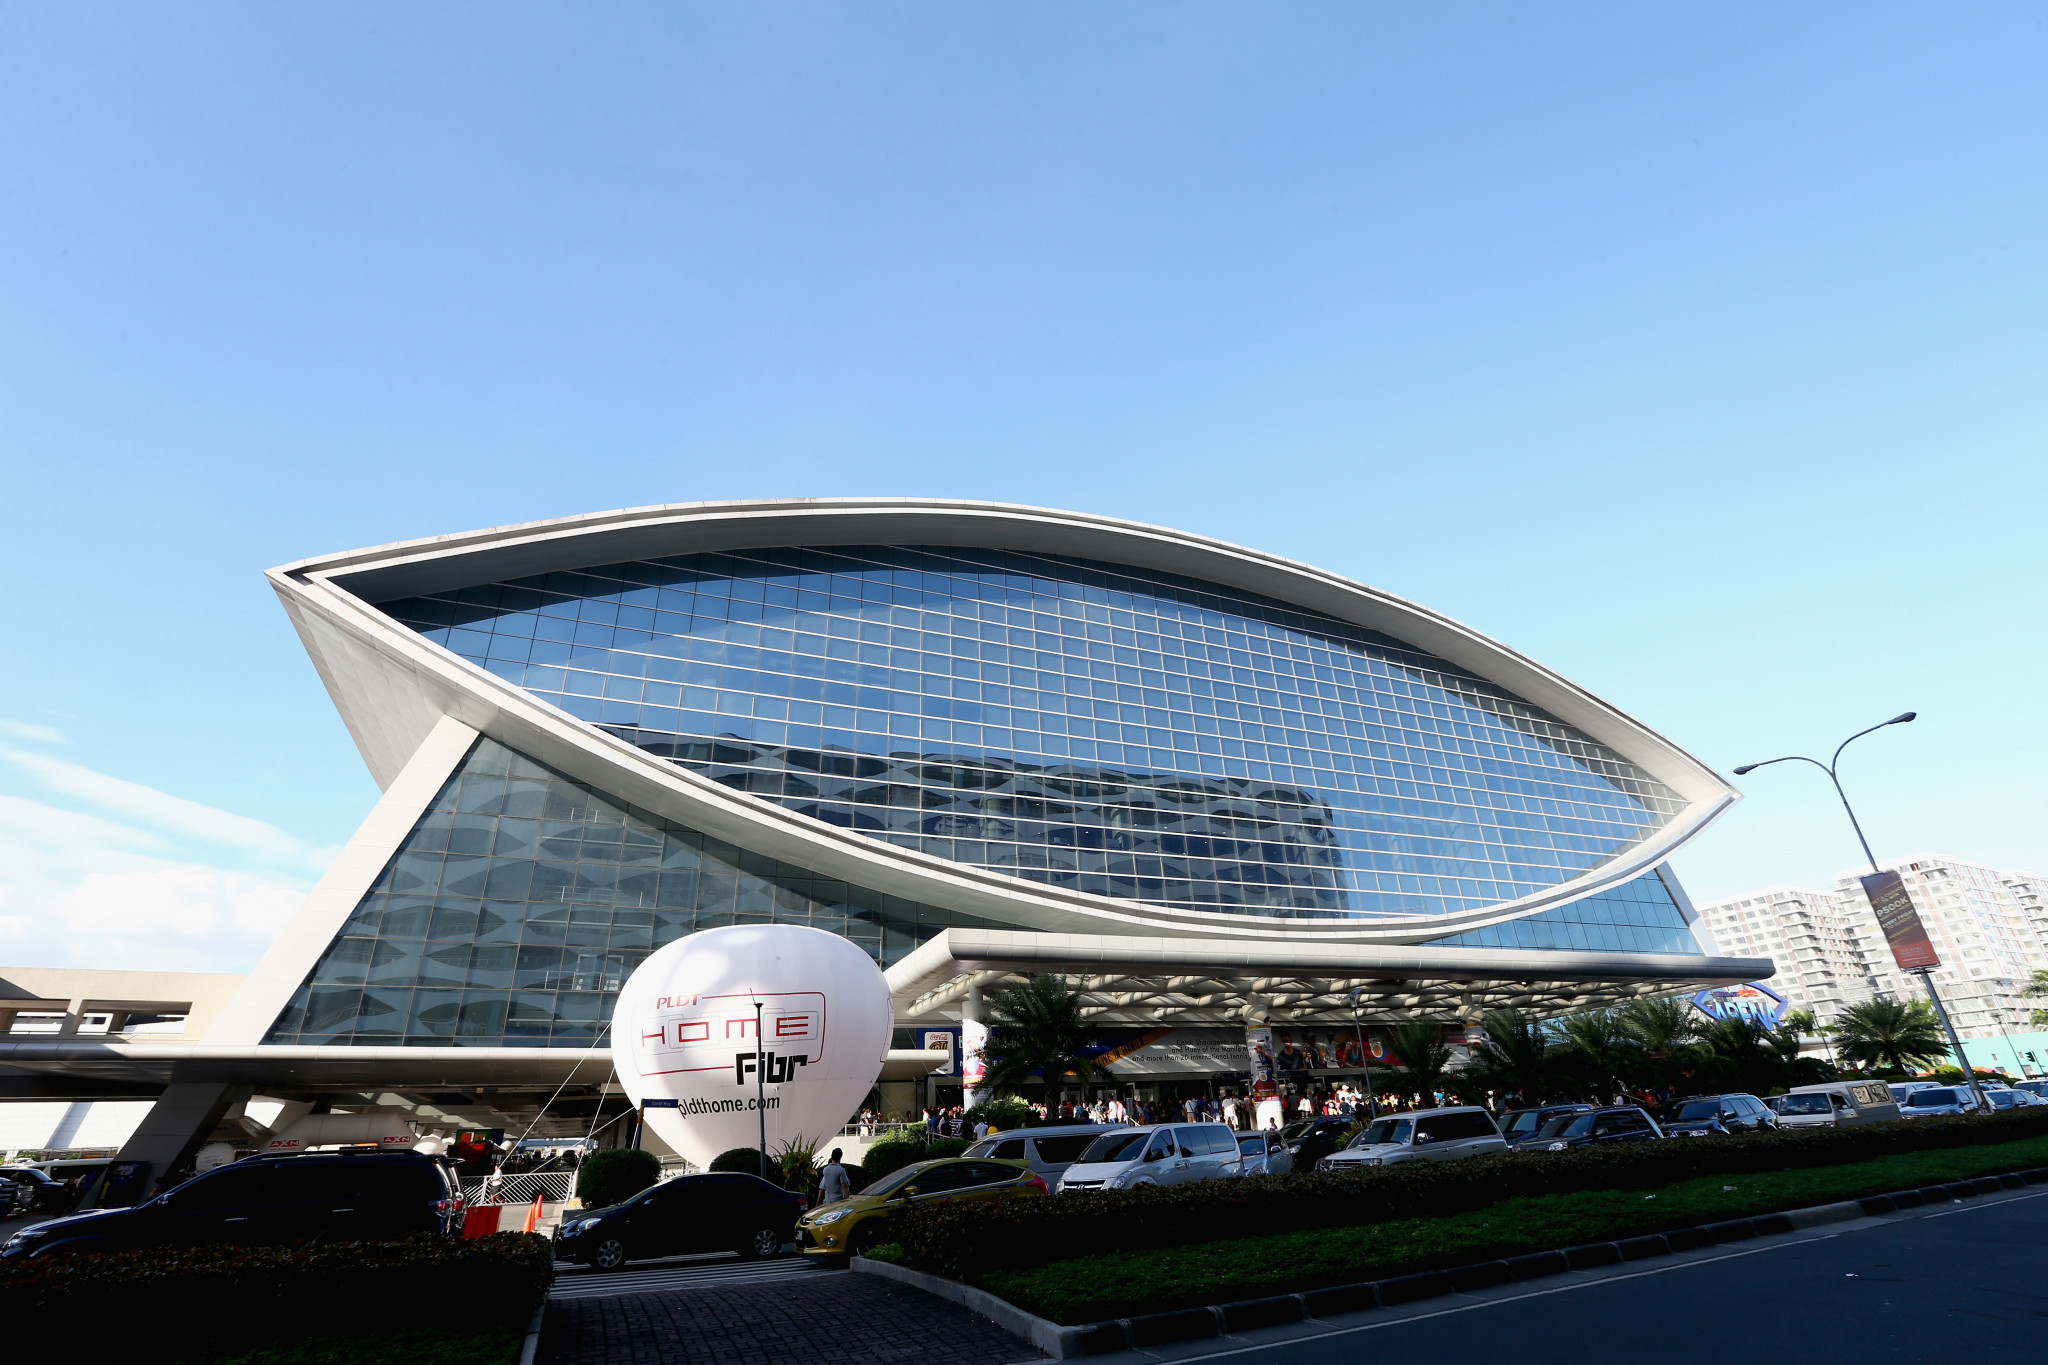 The Mall of Asia Arena in the Greater Manila Area is set to stage the Basketball World Cup final on September 10 ©Getty Images